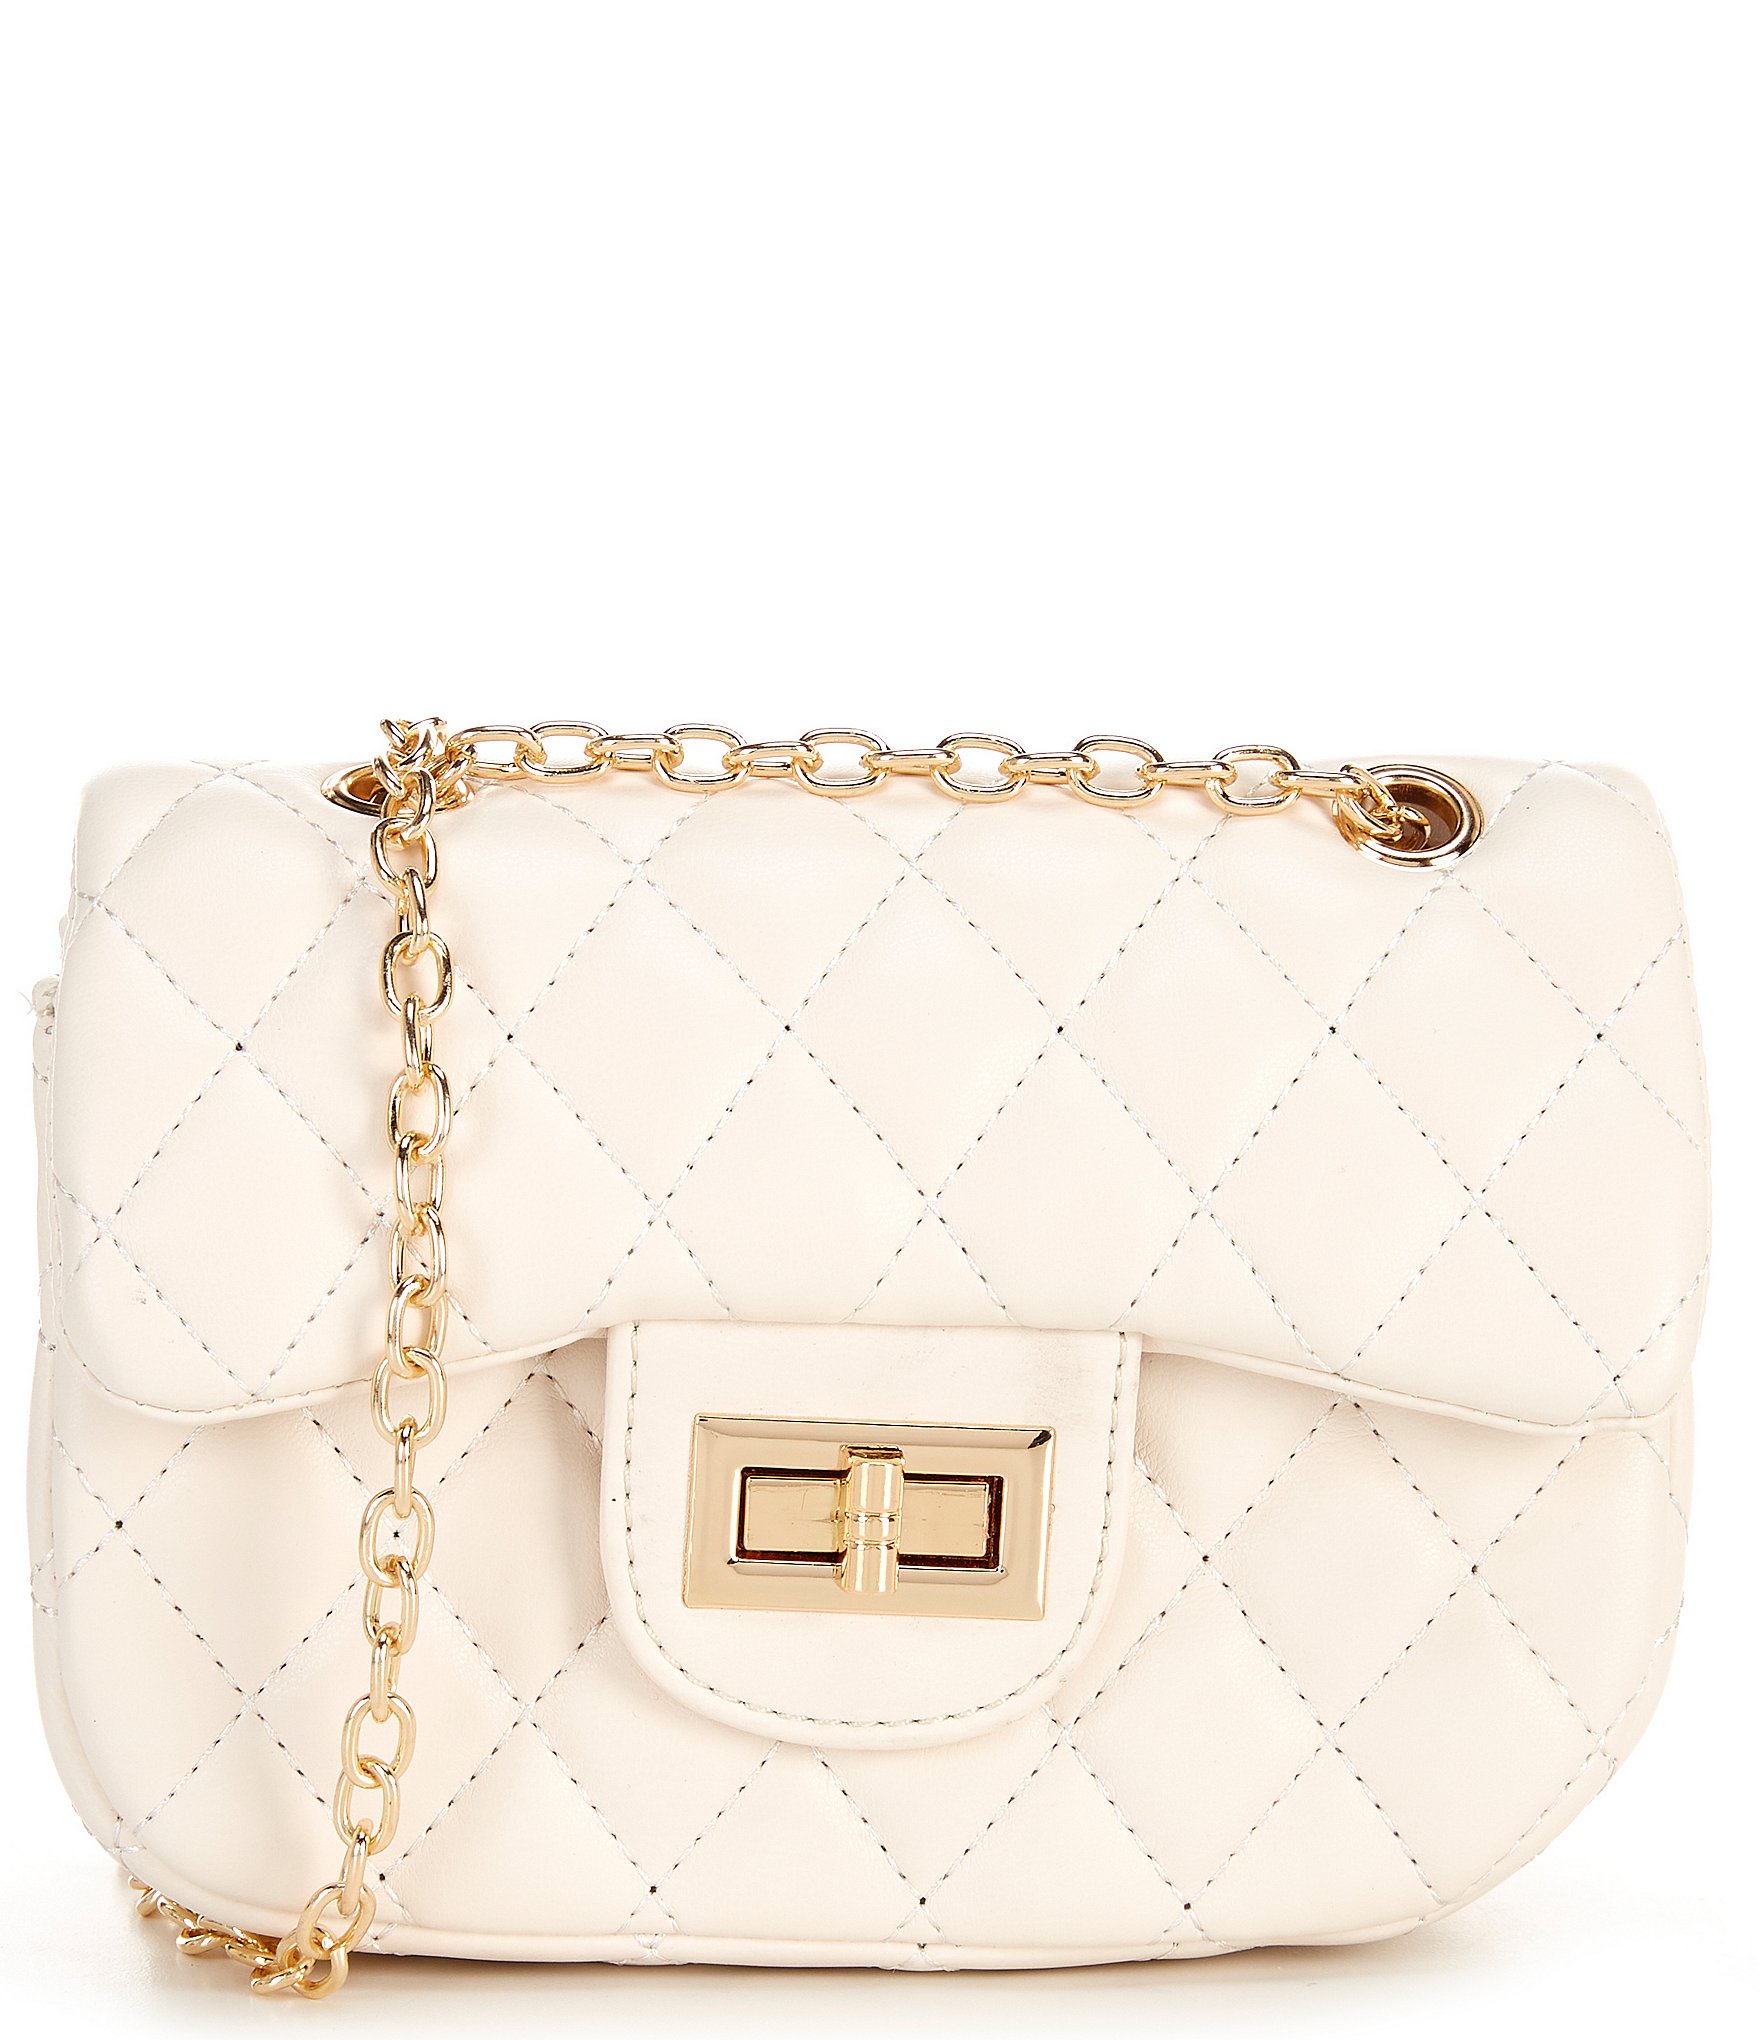 Purse PU Leather Sequin Handbags with Gold Chain Strap(White)